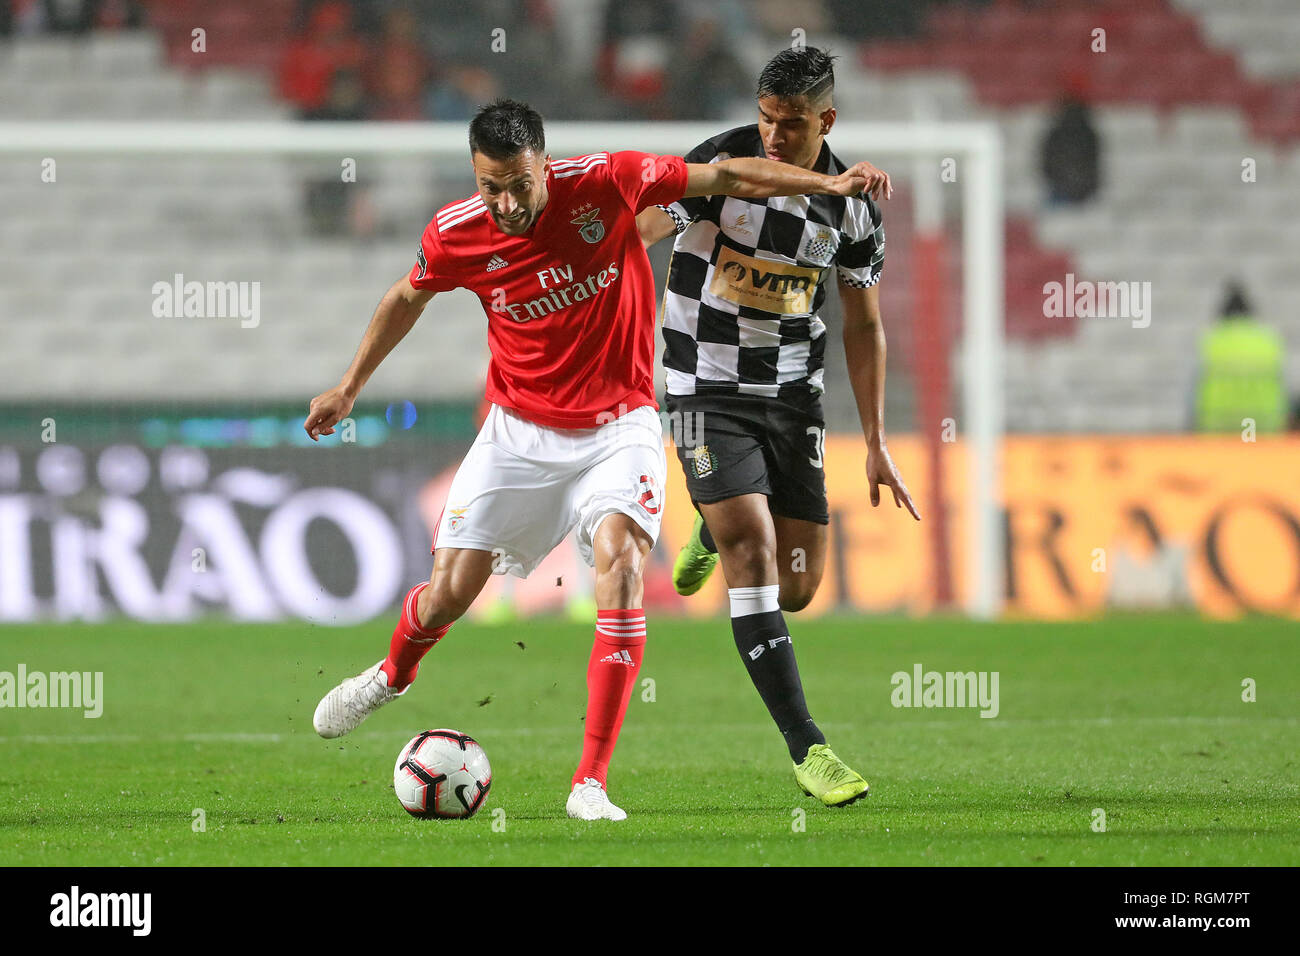 Andreas Samaris of SL Benfica (L) and  Matheus Índio of Boavista FC (R)  are seen in action during the League NOS 2018/19 football match between SL Benfica vs Boavista FC. (Final score; SL Benfica 5:1 Boavista FC) Stock Photo